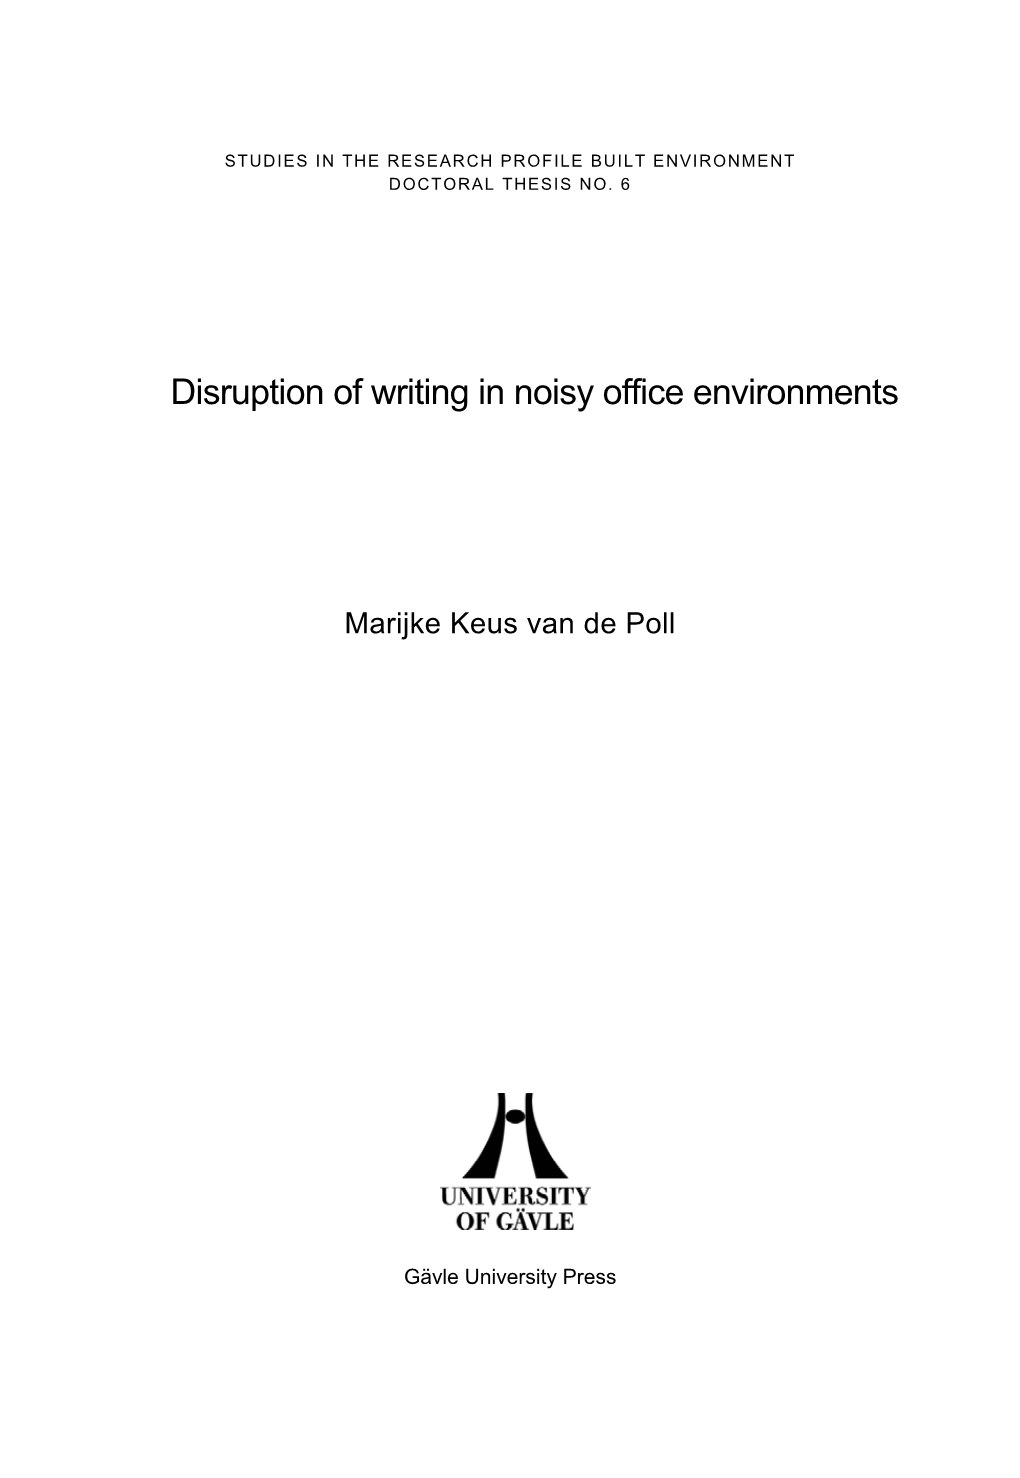 Disruption of Writing in Noisy Office Environments